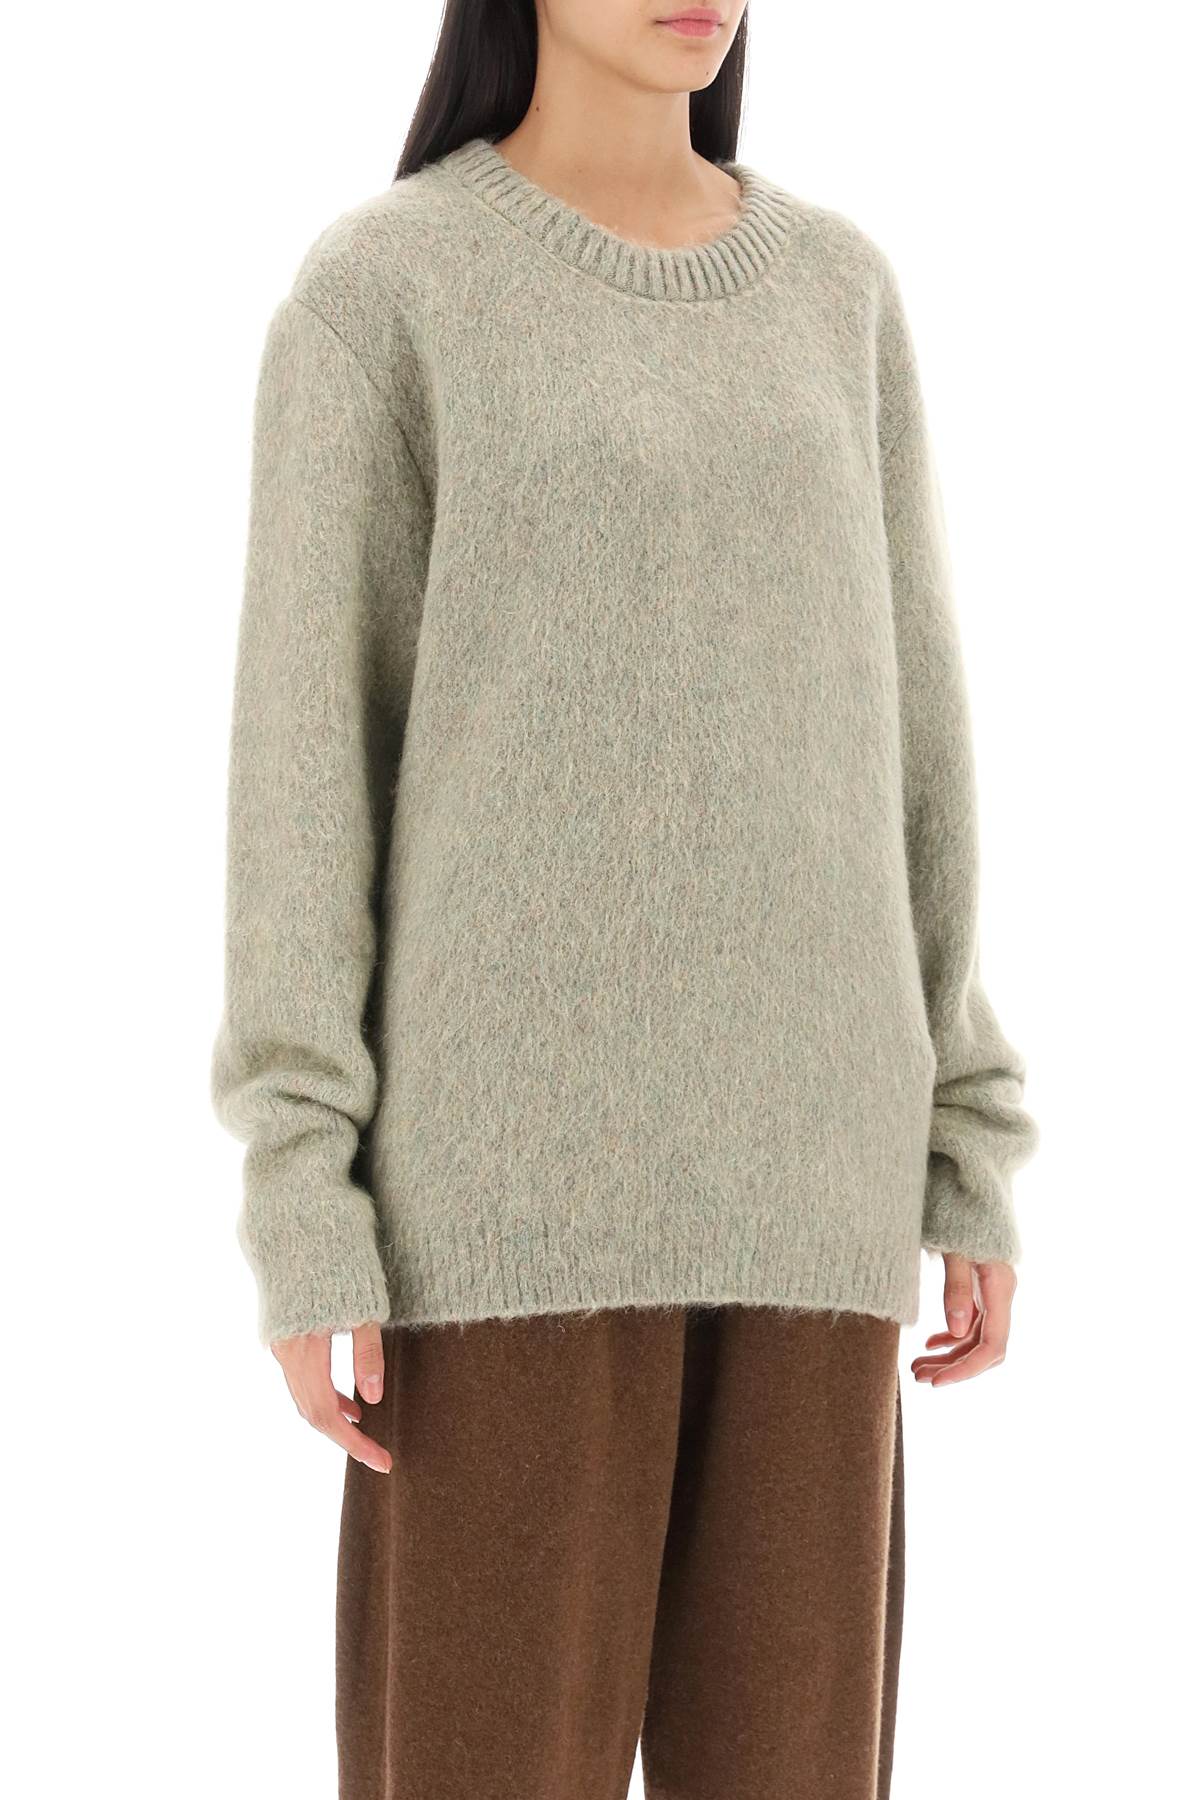 Lemaire sweater in melange-effect brushed yarn-1